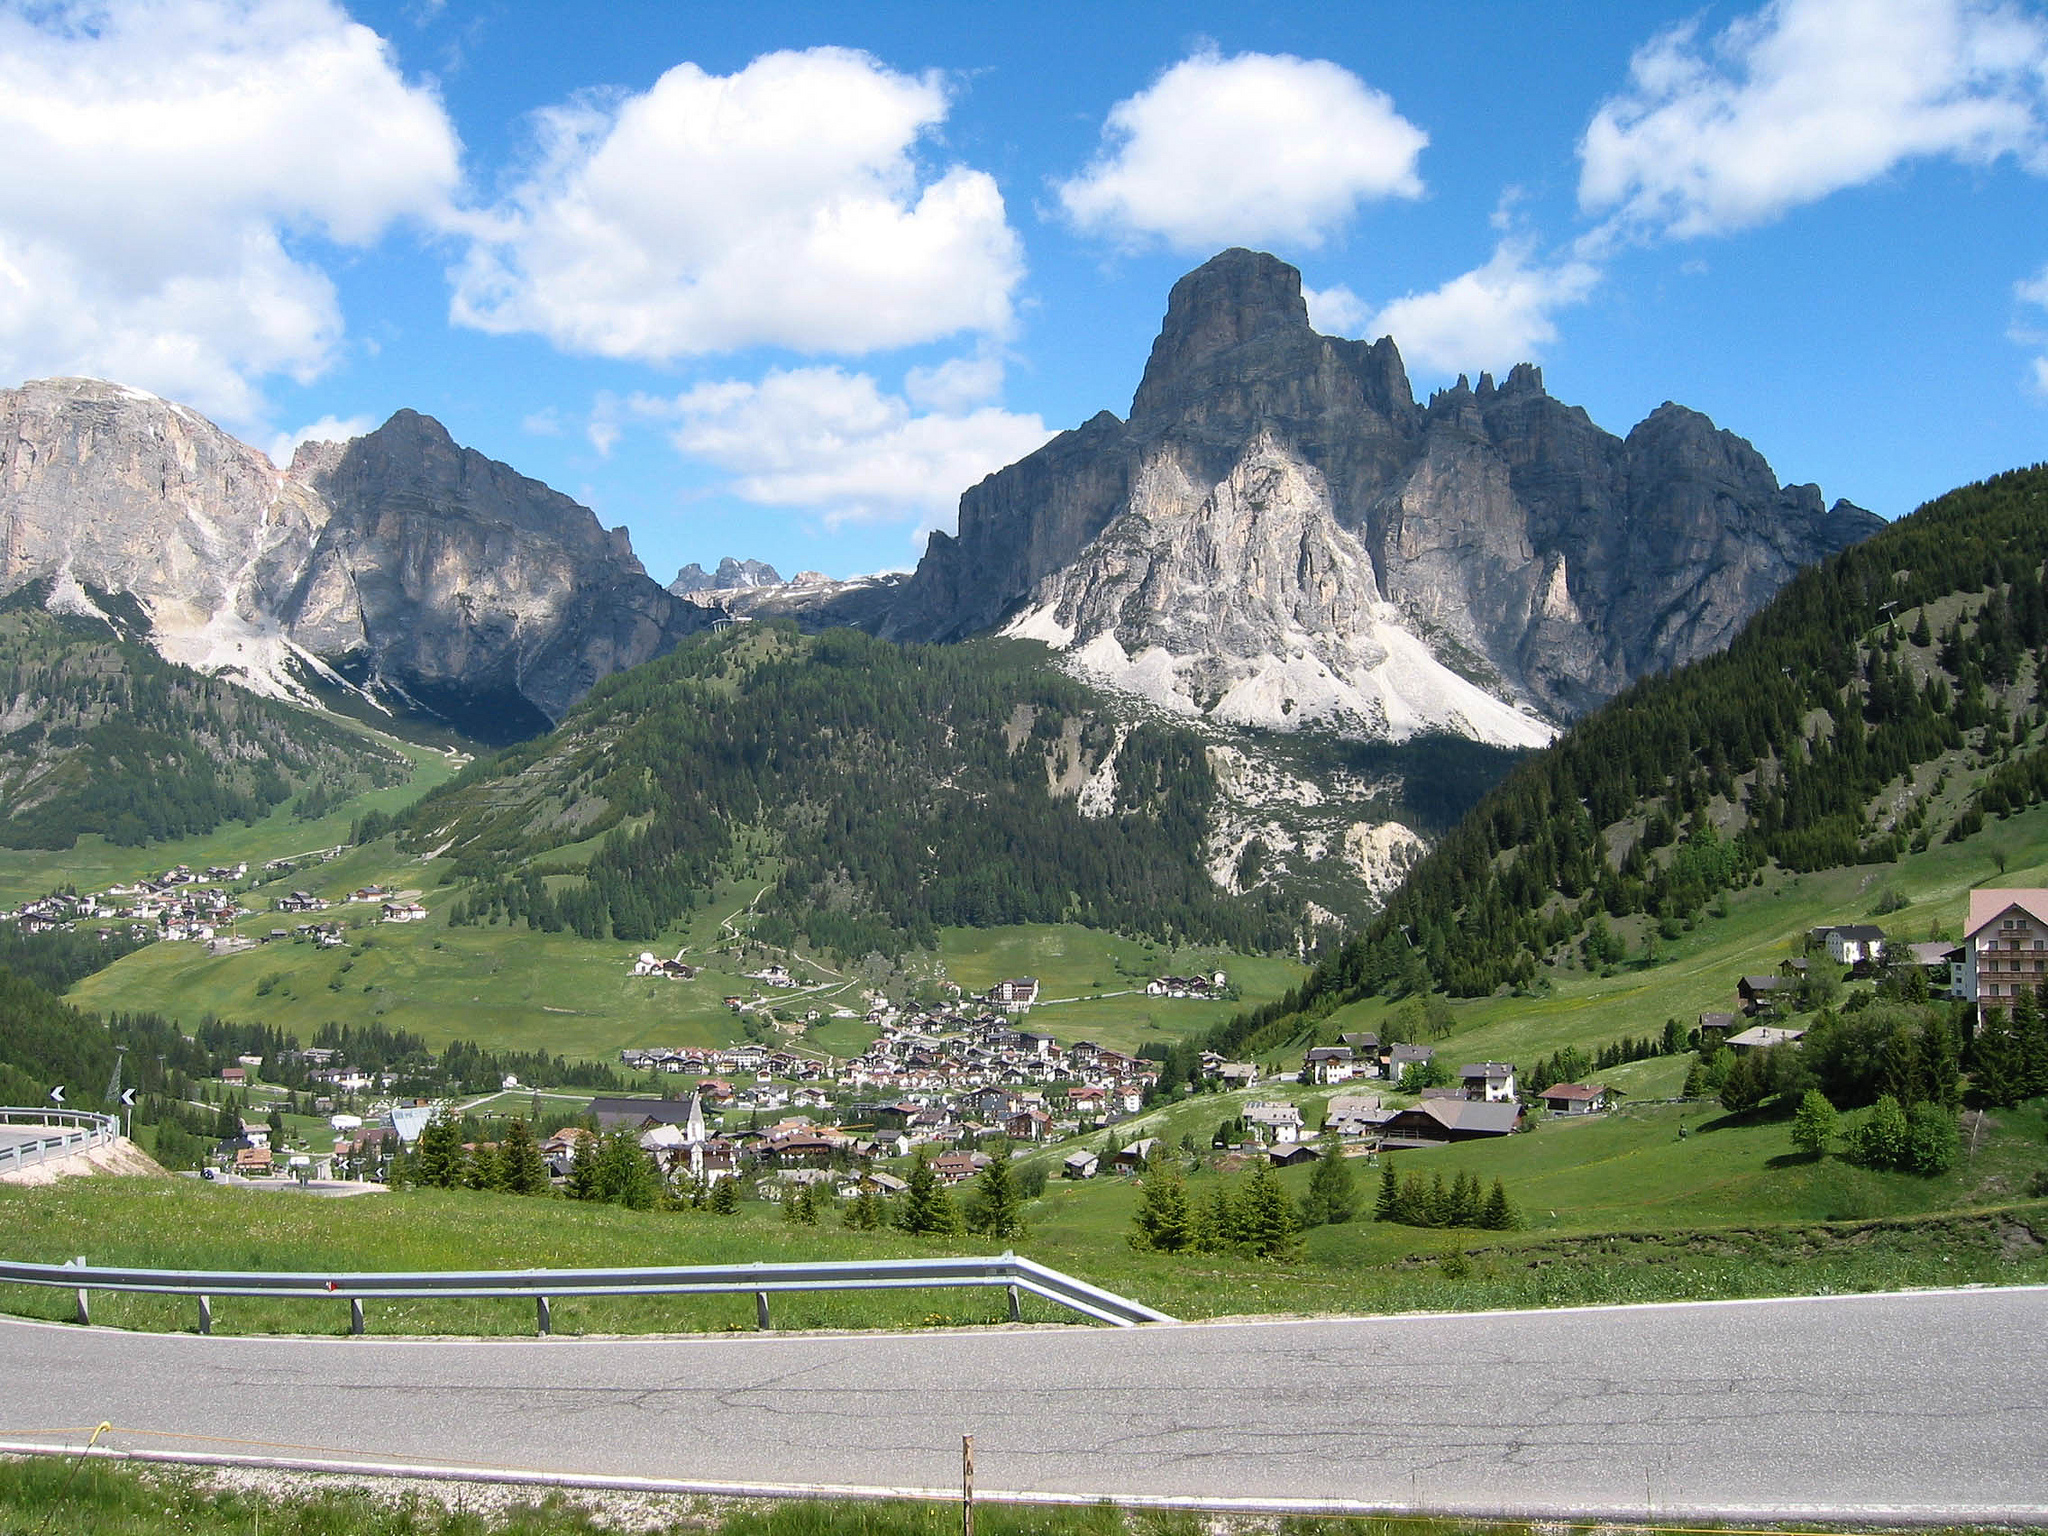 View of Sassongher Peak in the Dolomites - one of my favorite places.